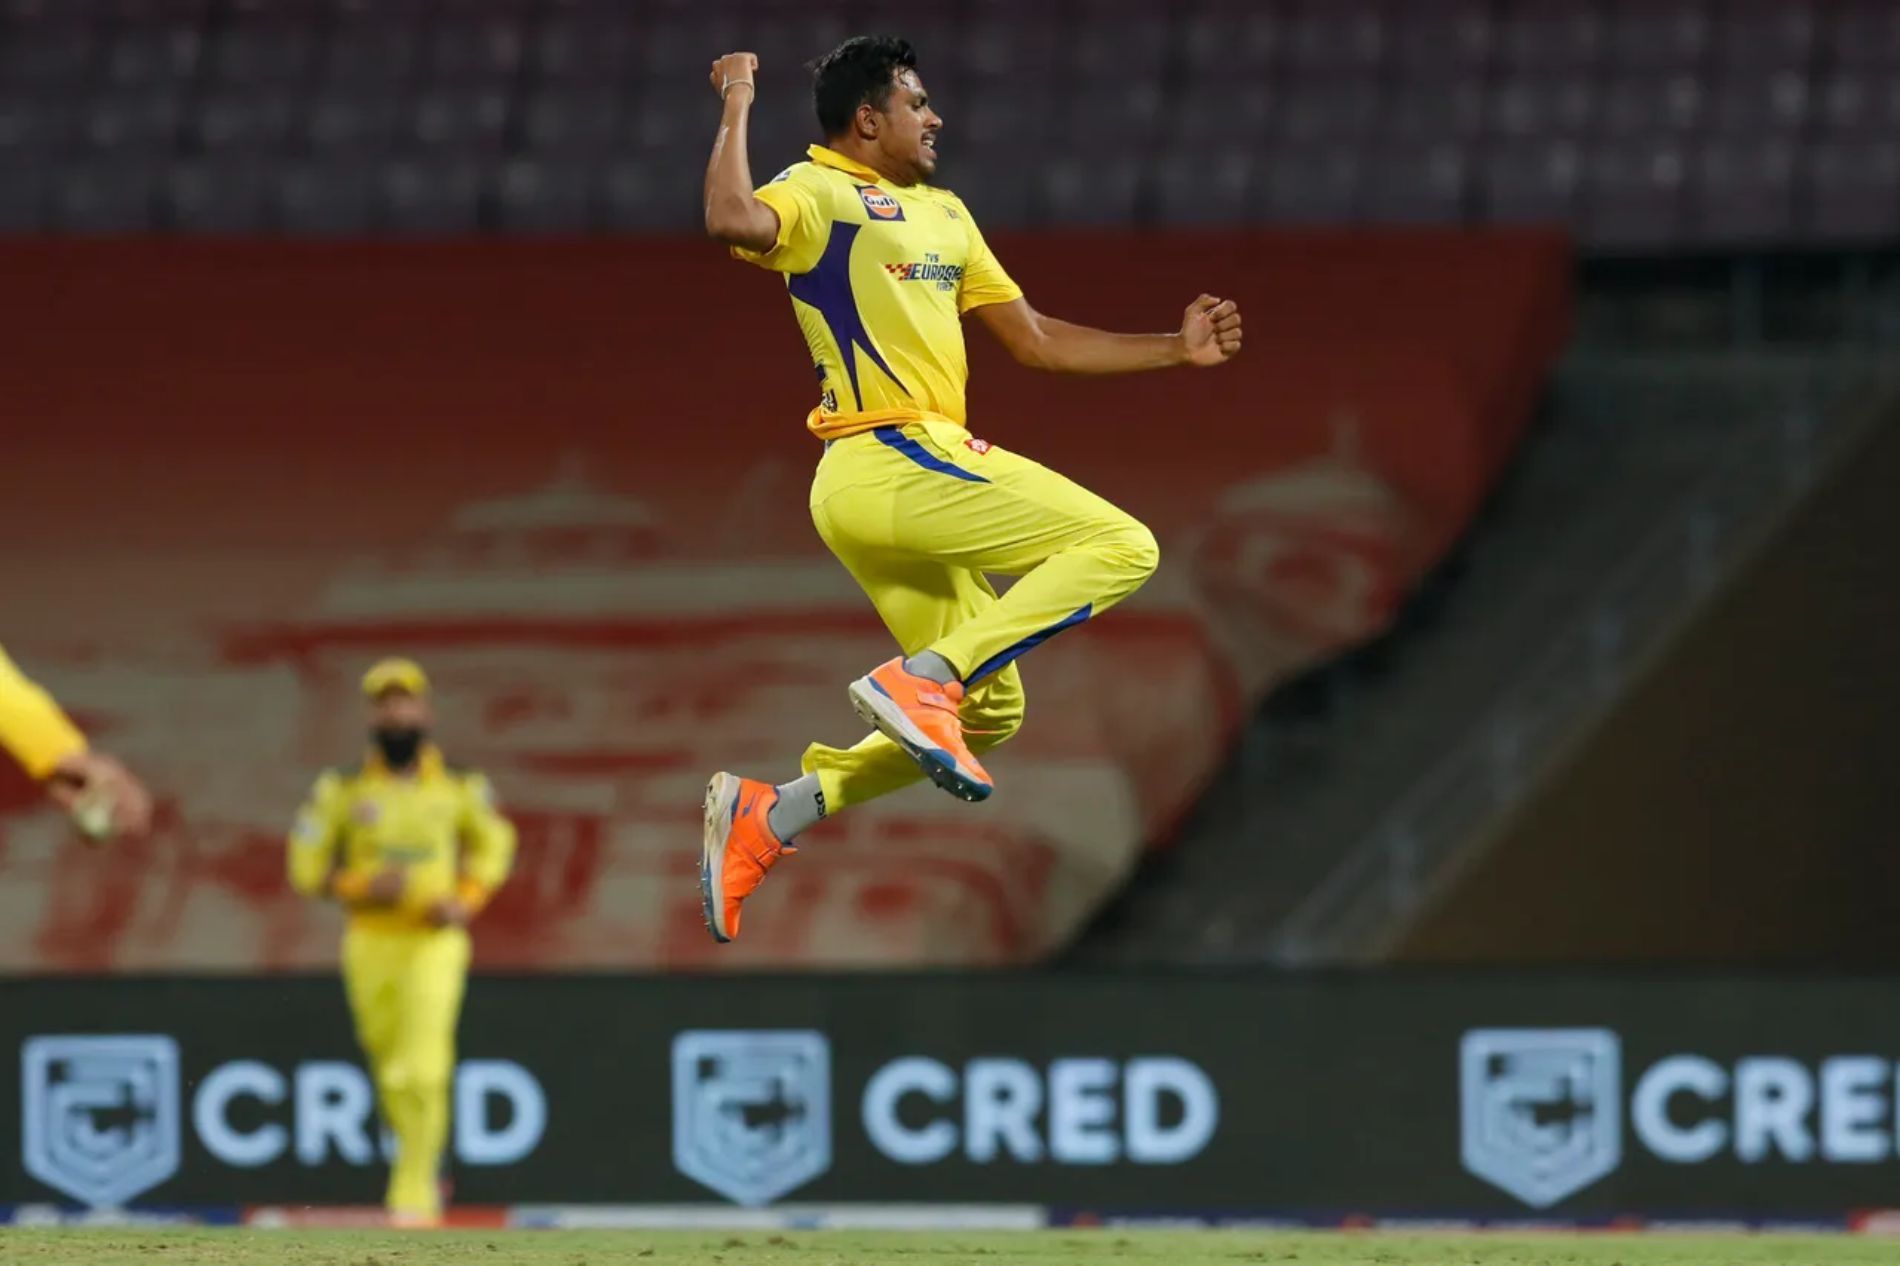 Young Sri Lankan spinner Maheesh Theekshana ran through RCB with figures of four for 33 in Match 22 as CSK registered their first win in IPL 2022.